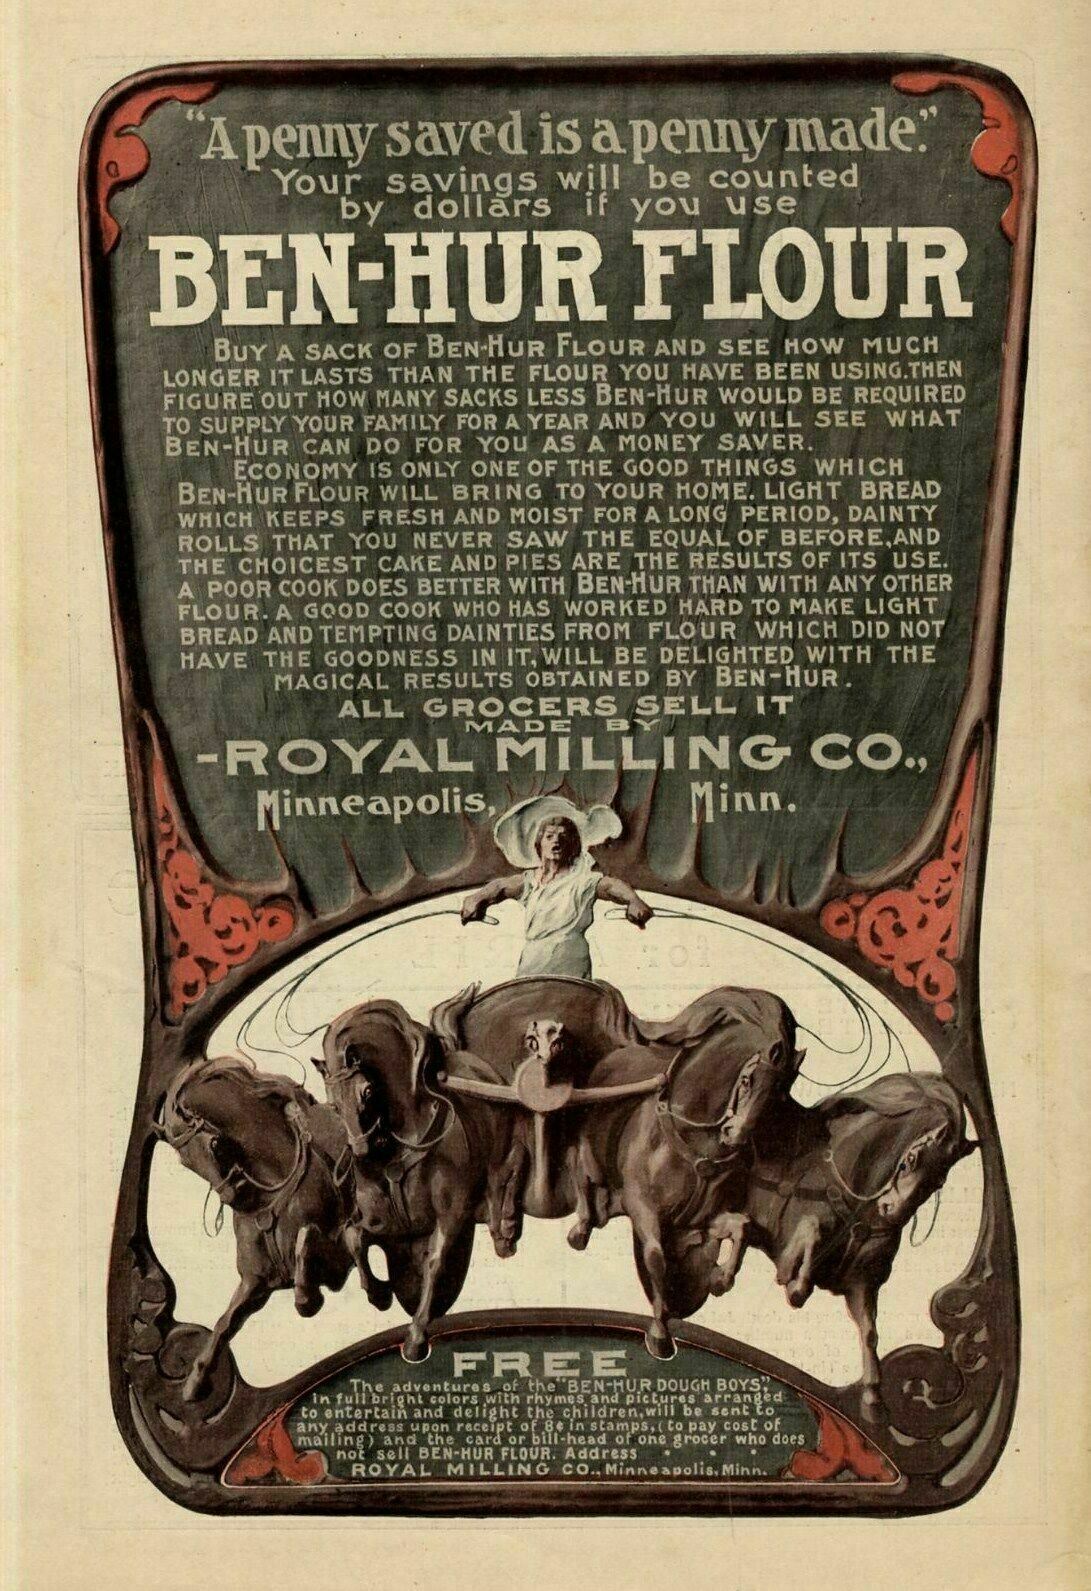 BEN-HUR FLOUR CHARIOT ROYAL MILLING MINNEAPOLIS MINNESOTA ALL GROCERS SELL IT